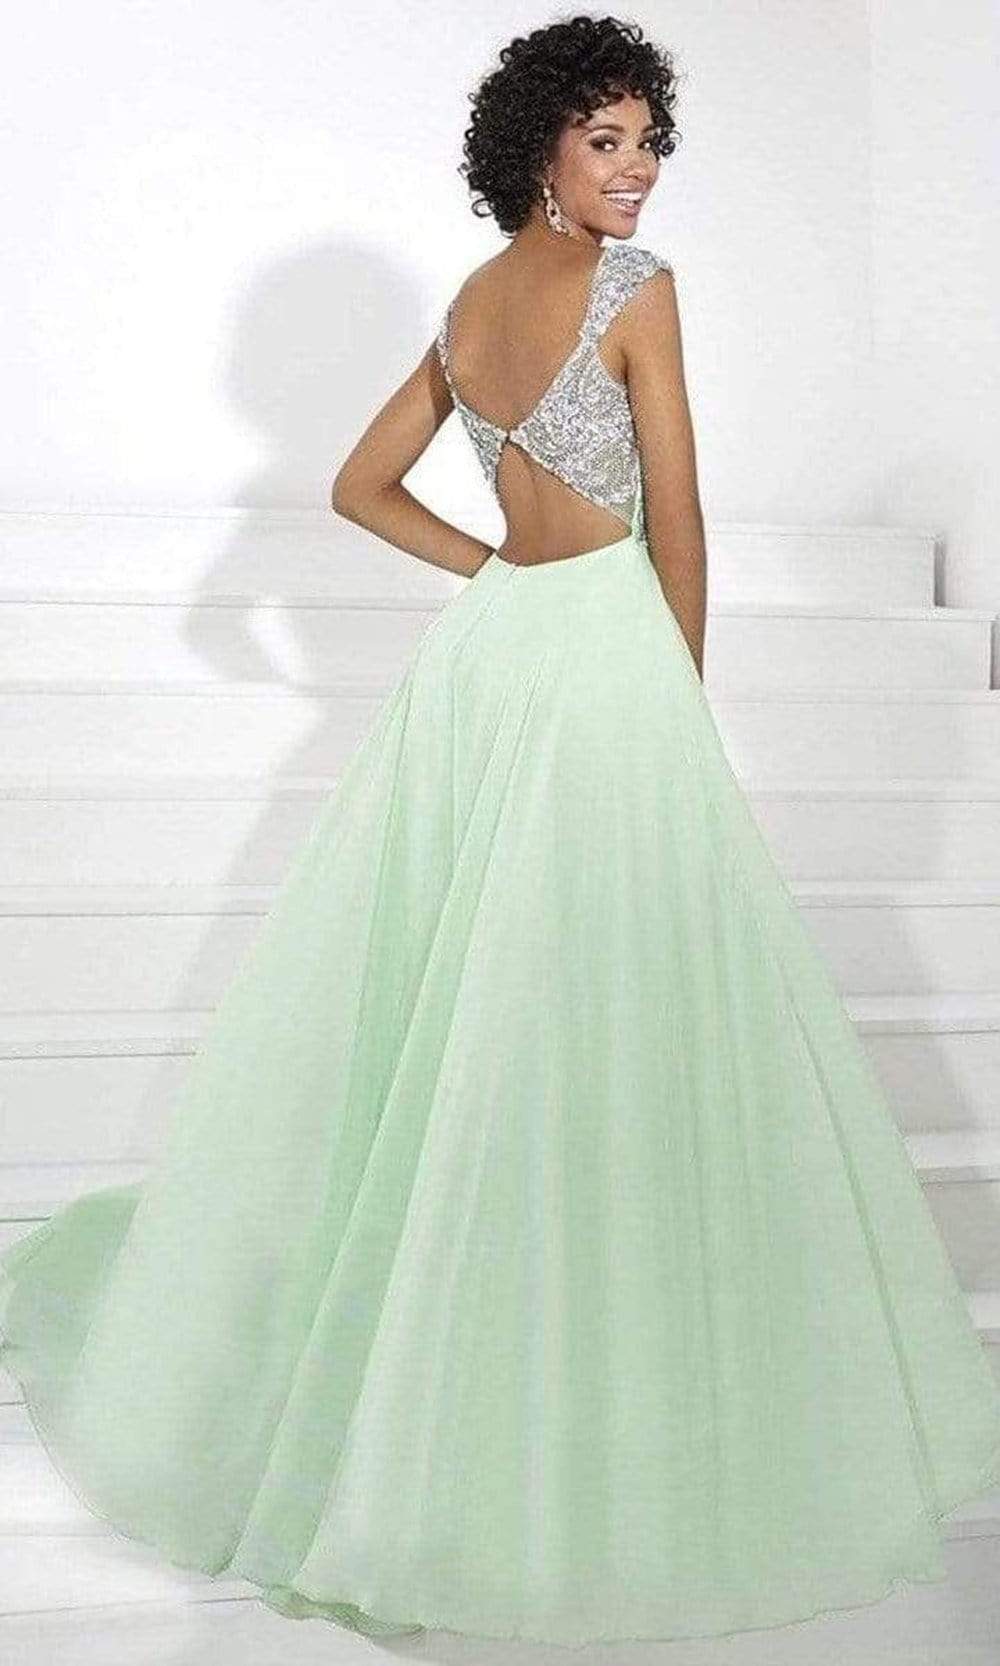 Tiffany Designs - Bejeweled Sleeveless A-Line Gown 16085SC In Green